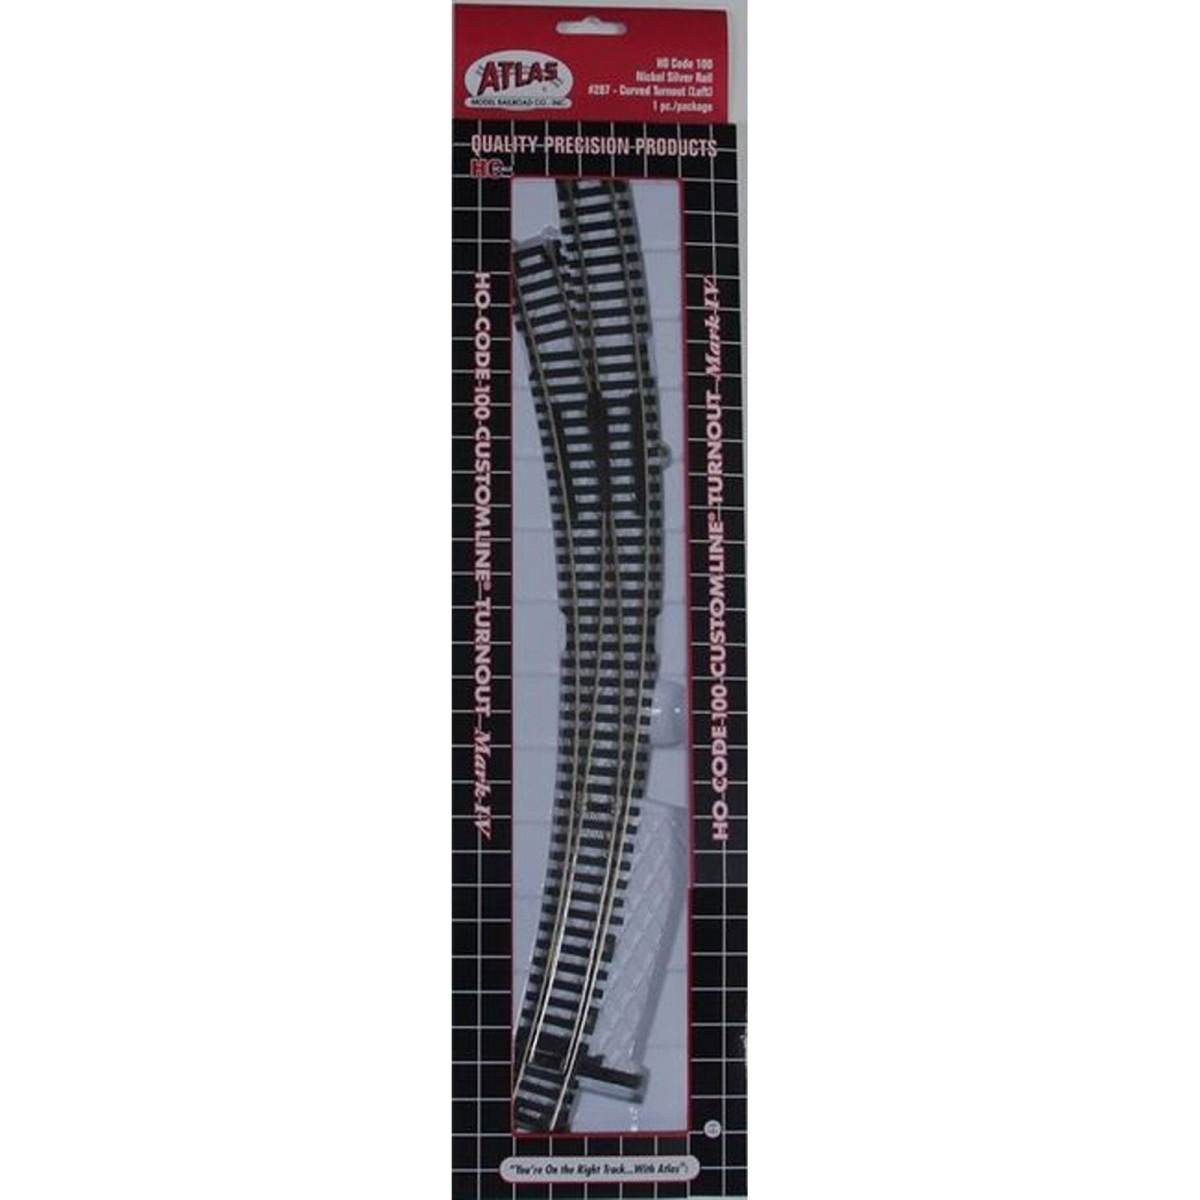 Atlas 287 No. 100 Left Hand HO Scale Mark IV Turnout Curved Track